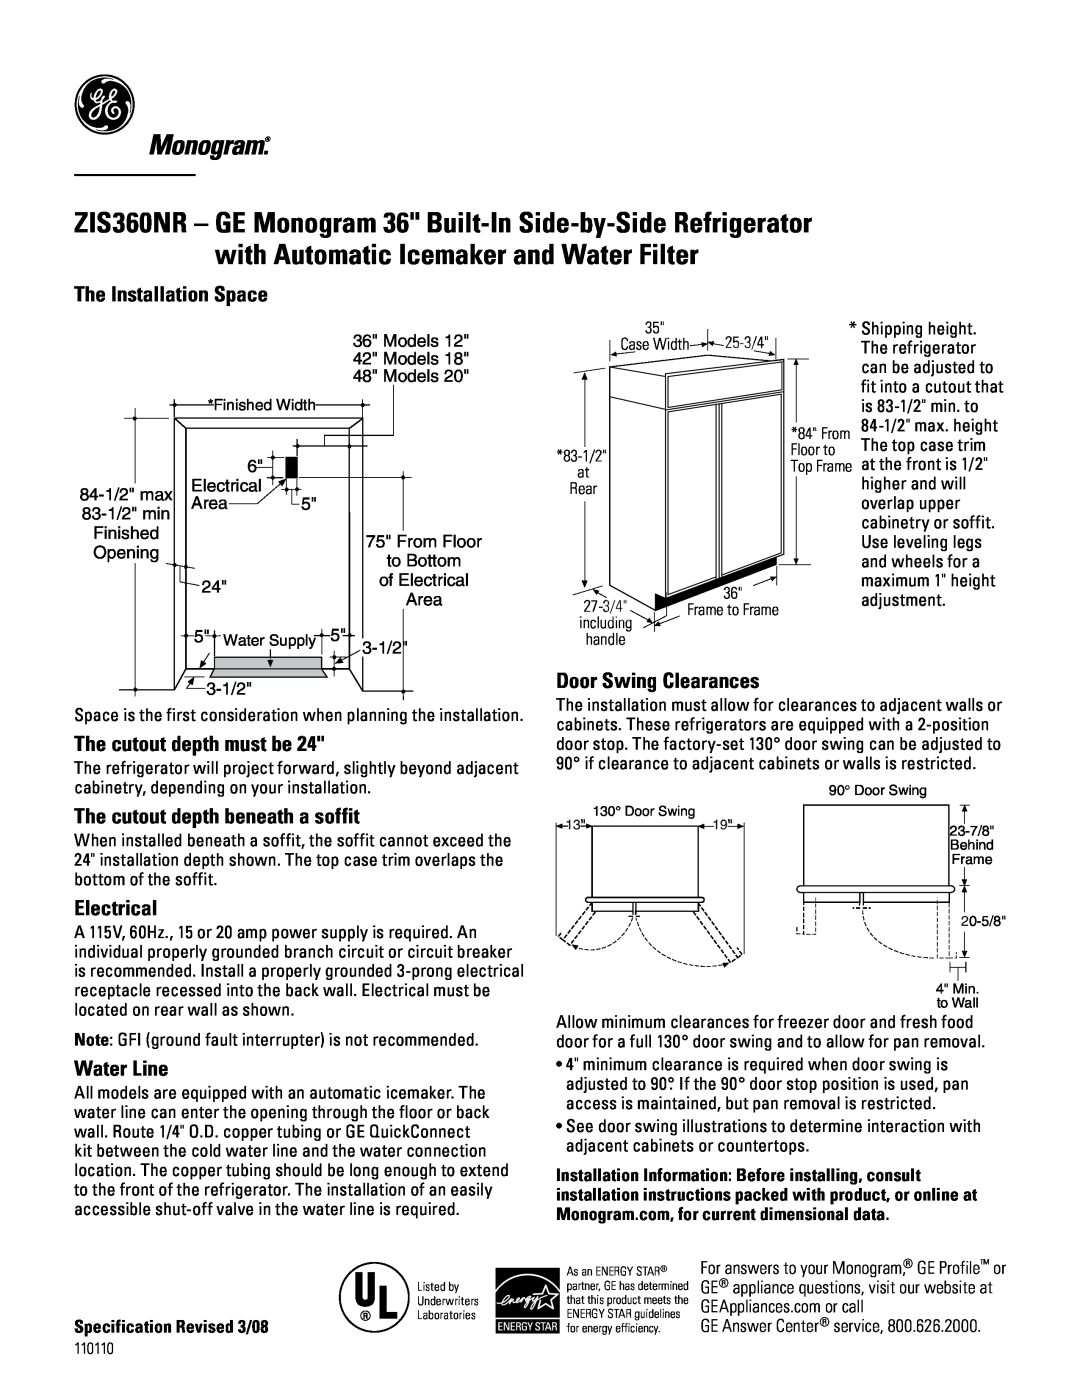 GE Monogram ZIS360NR installation instructions The Installation Space, The cutout depth must be, Door Swing Clearances 